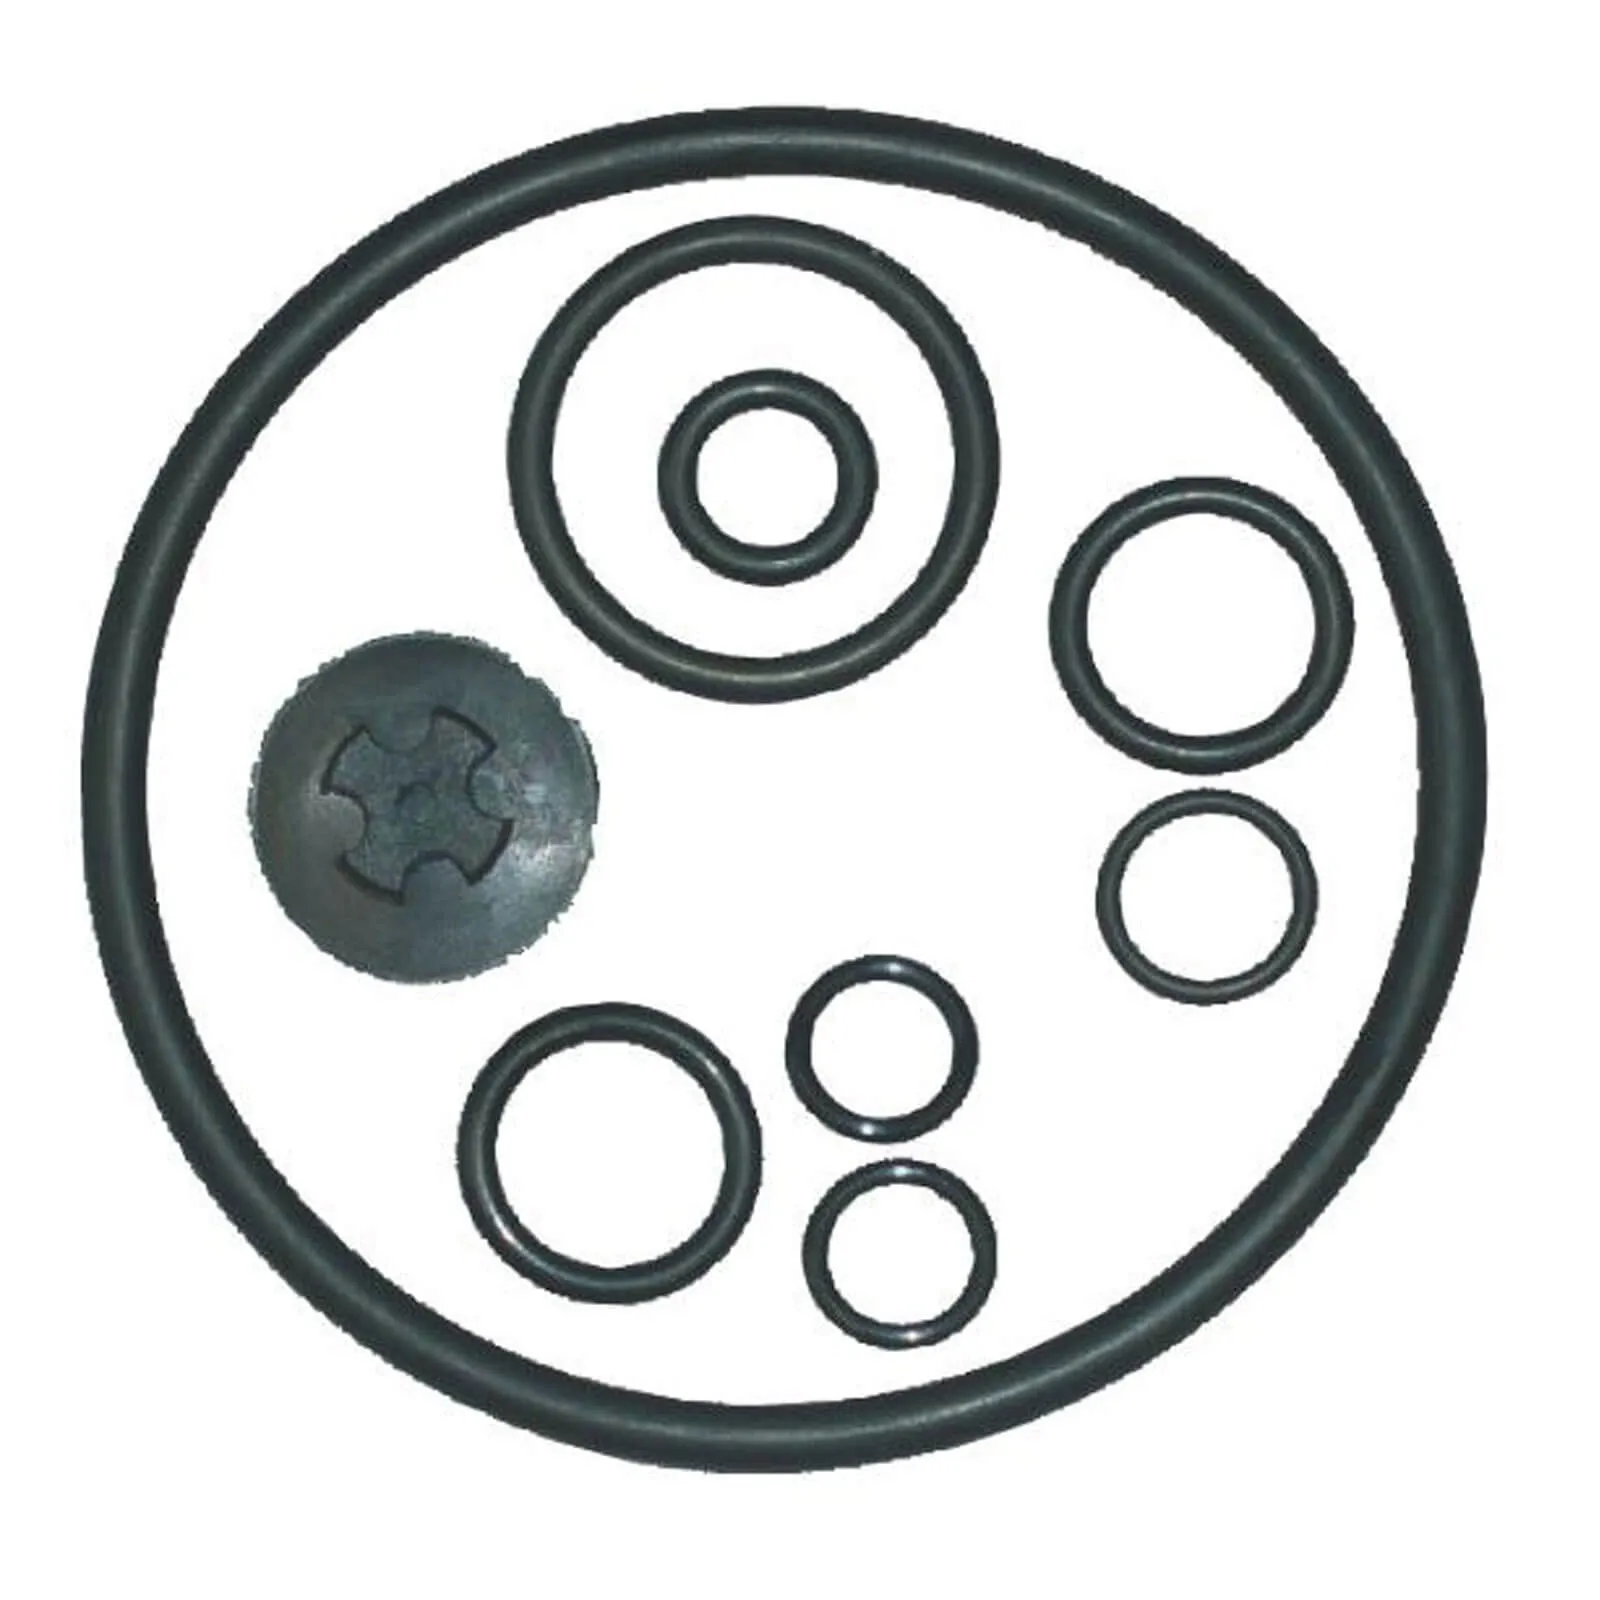 Solo Gasket Kit for 461-02, 462, 463 Pressure Sprayers